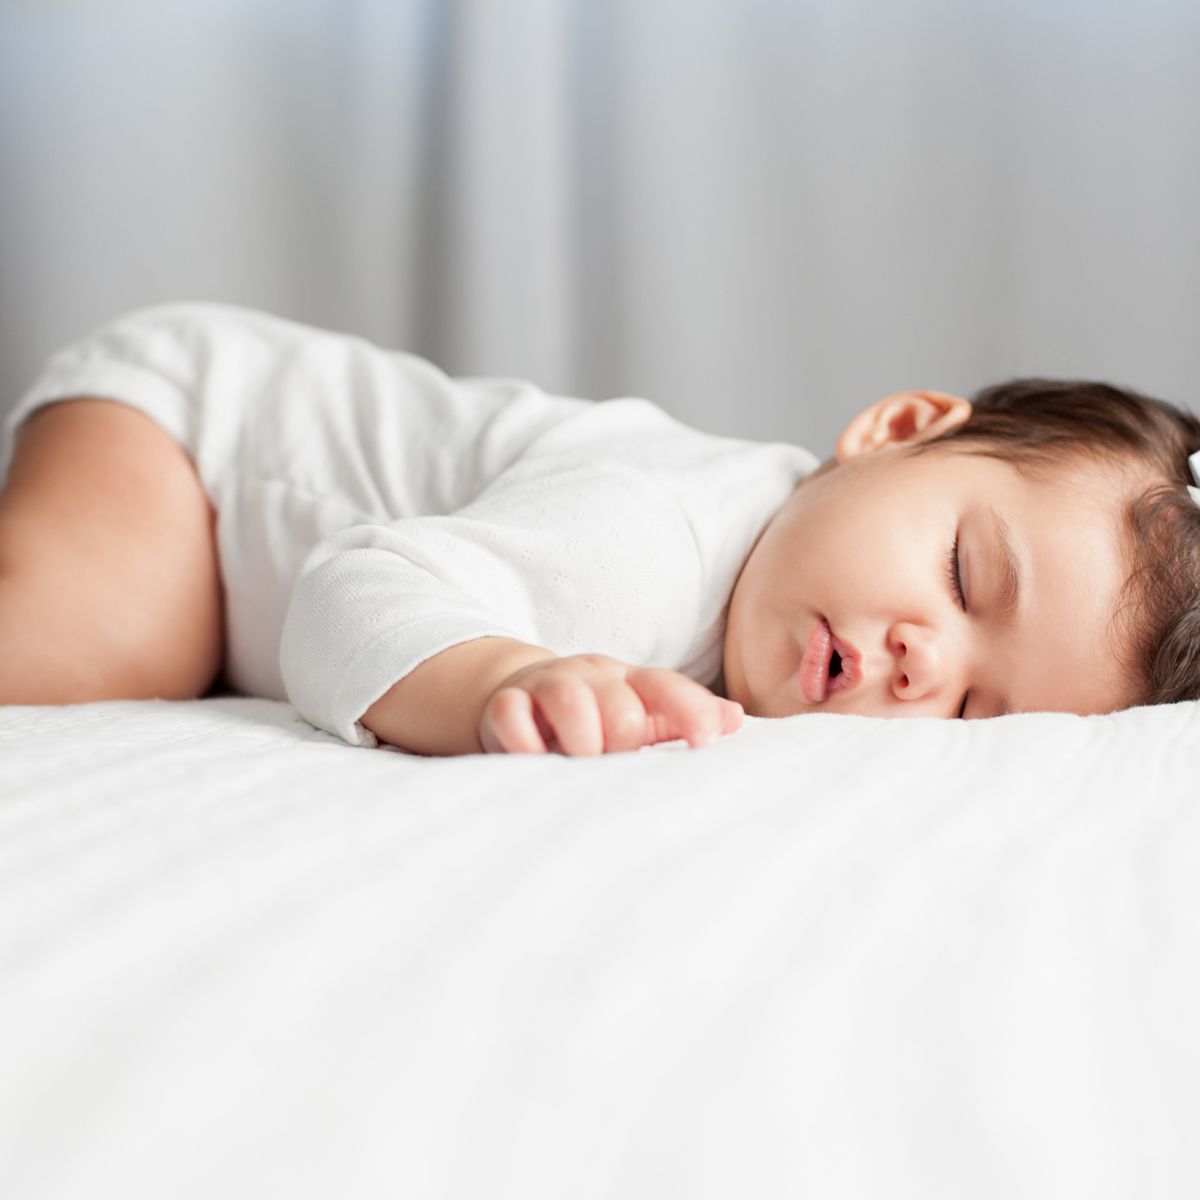 4 Tips for Successfully Sleep Training for Naps